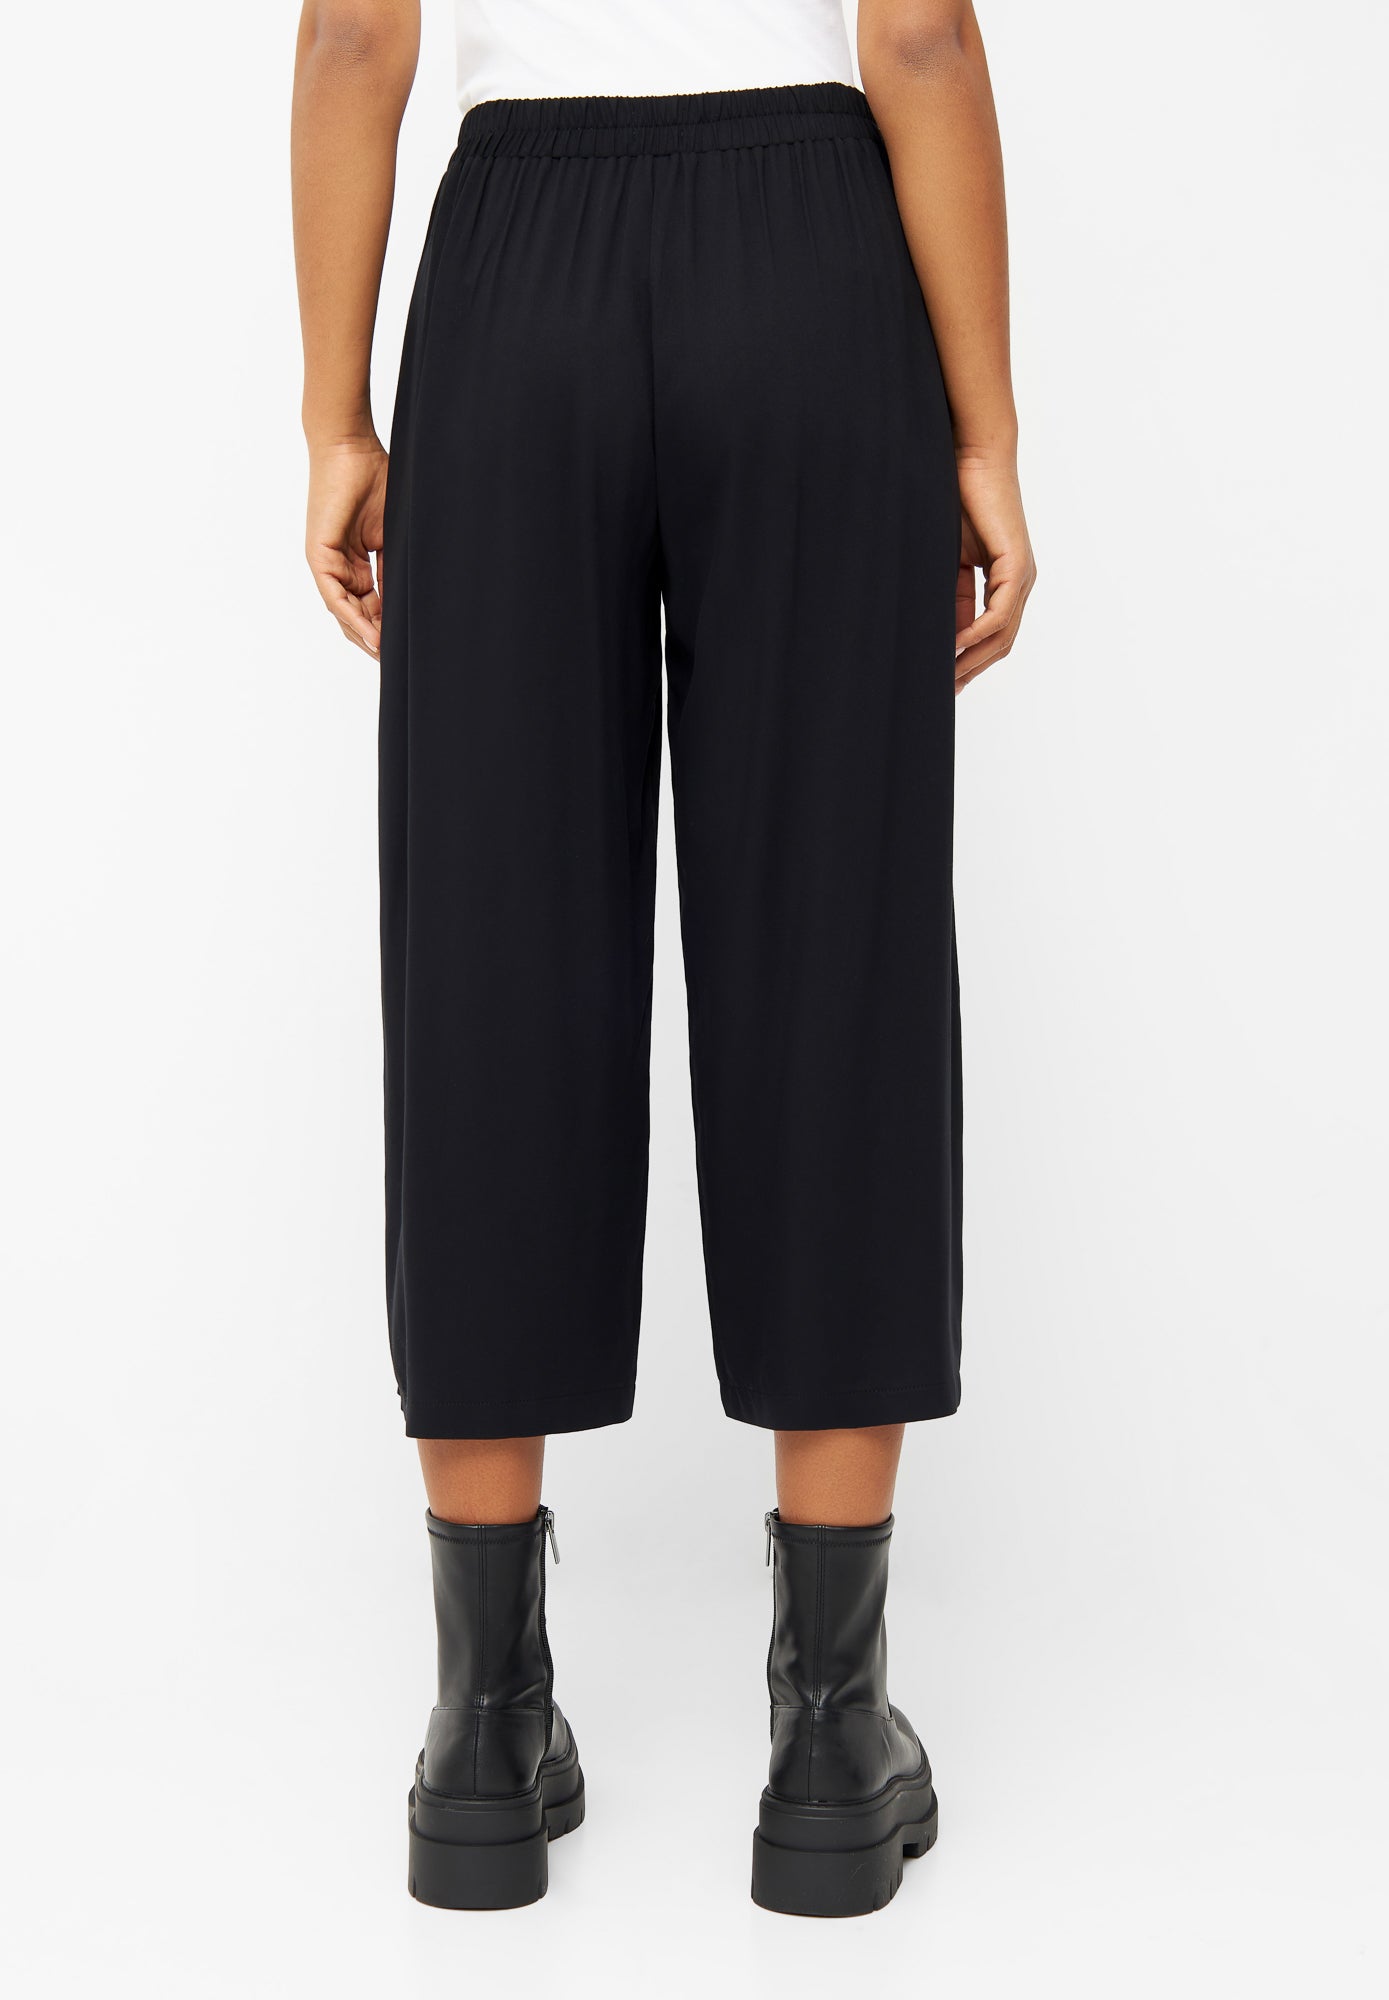 Givn - Anna Trousers Black